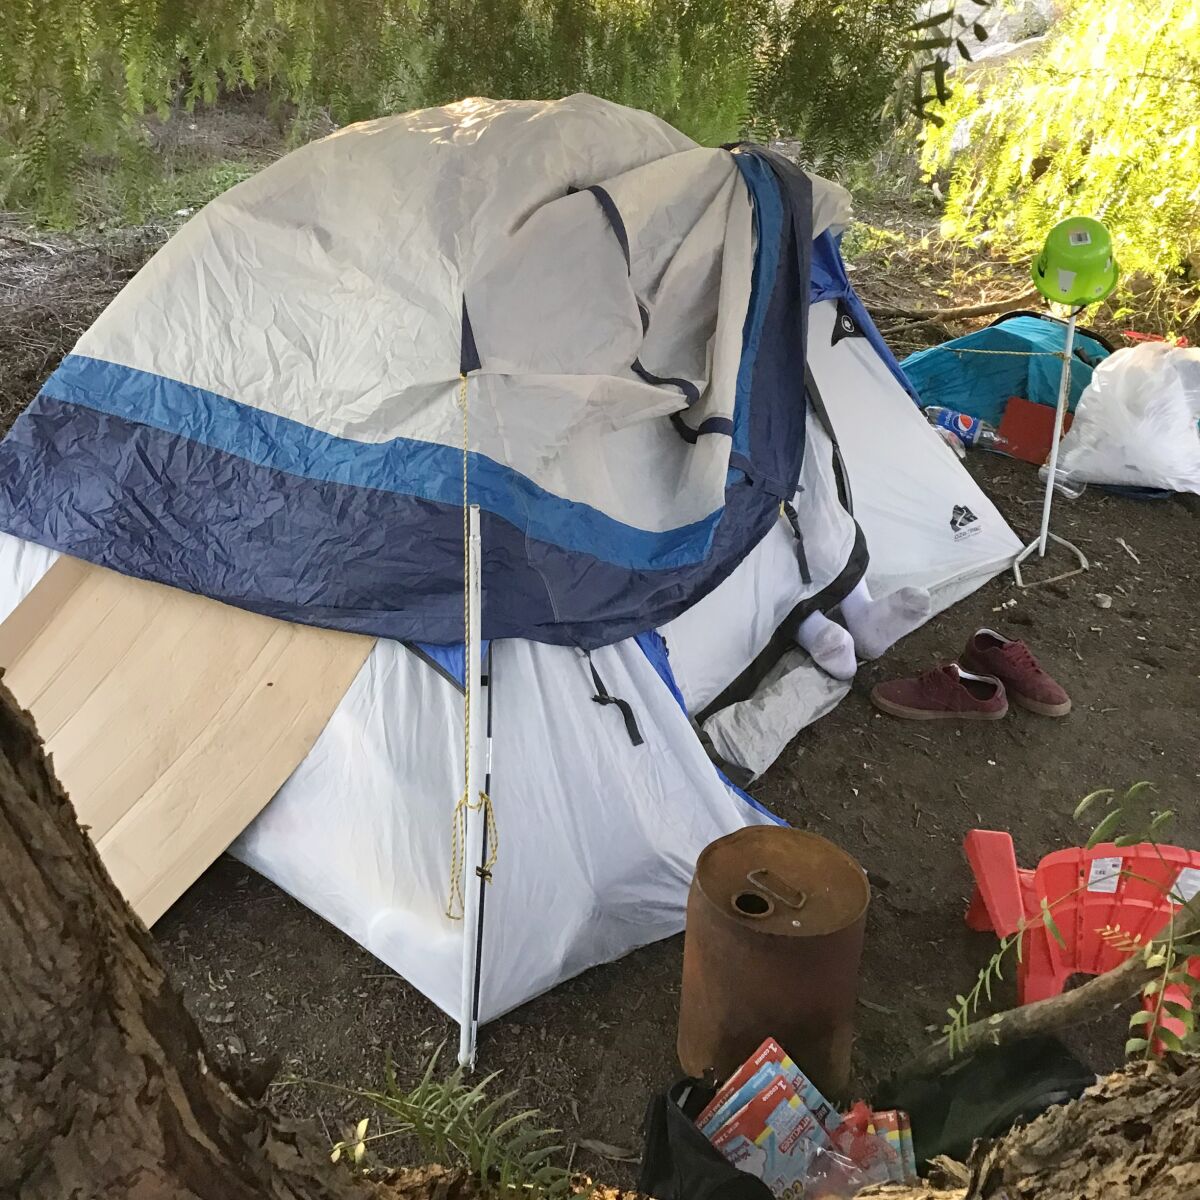 Identifying a larger number of homeless people in Ramona may help efforts to establish transitional housing.